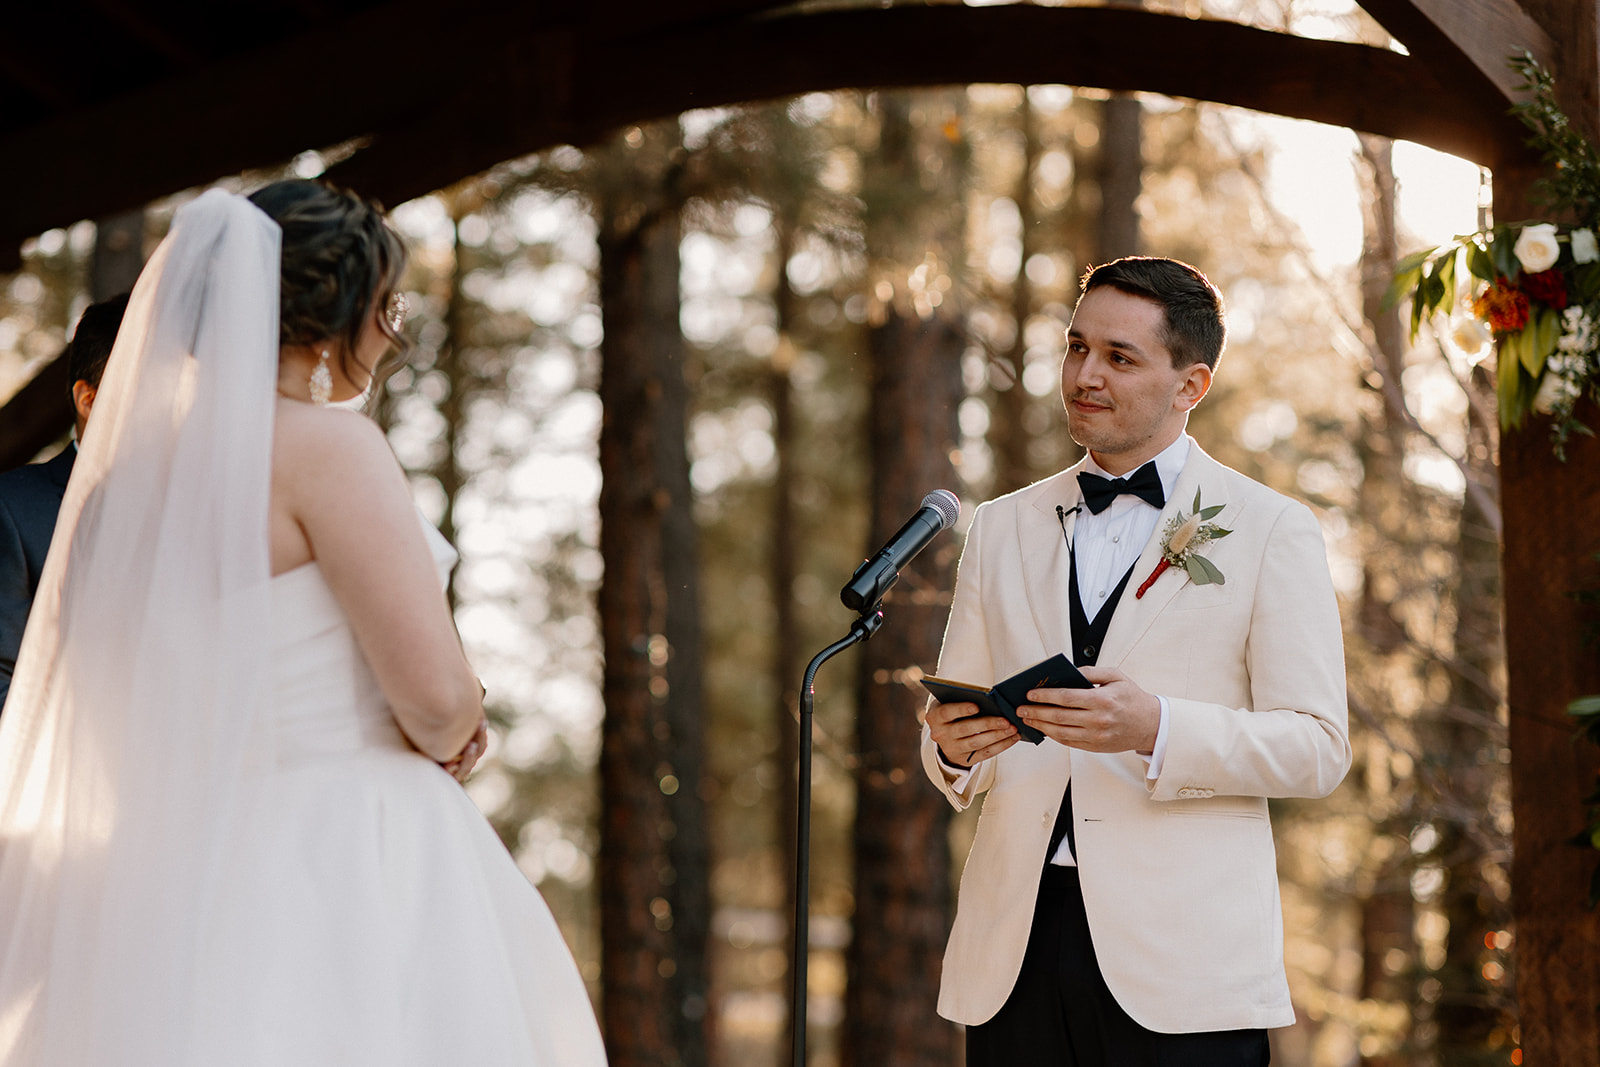 Groom reads his vows during their dreamy wedding day